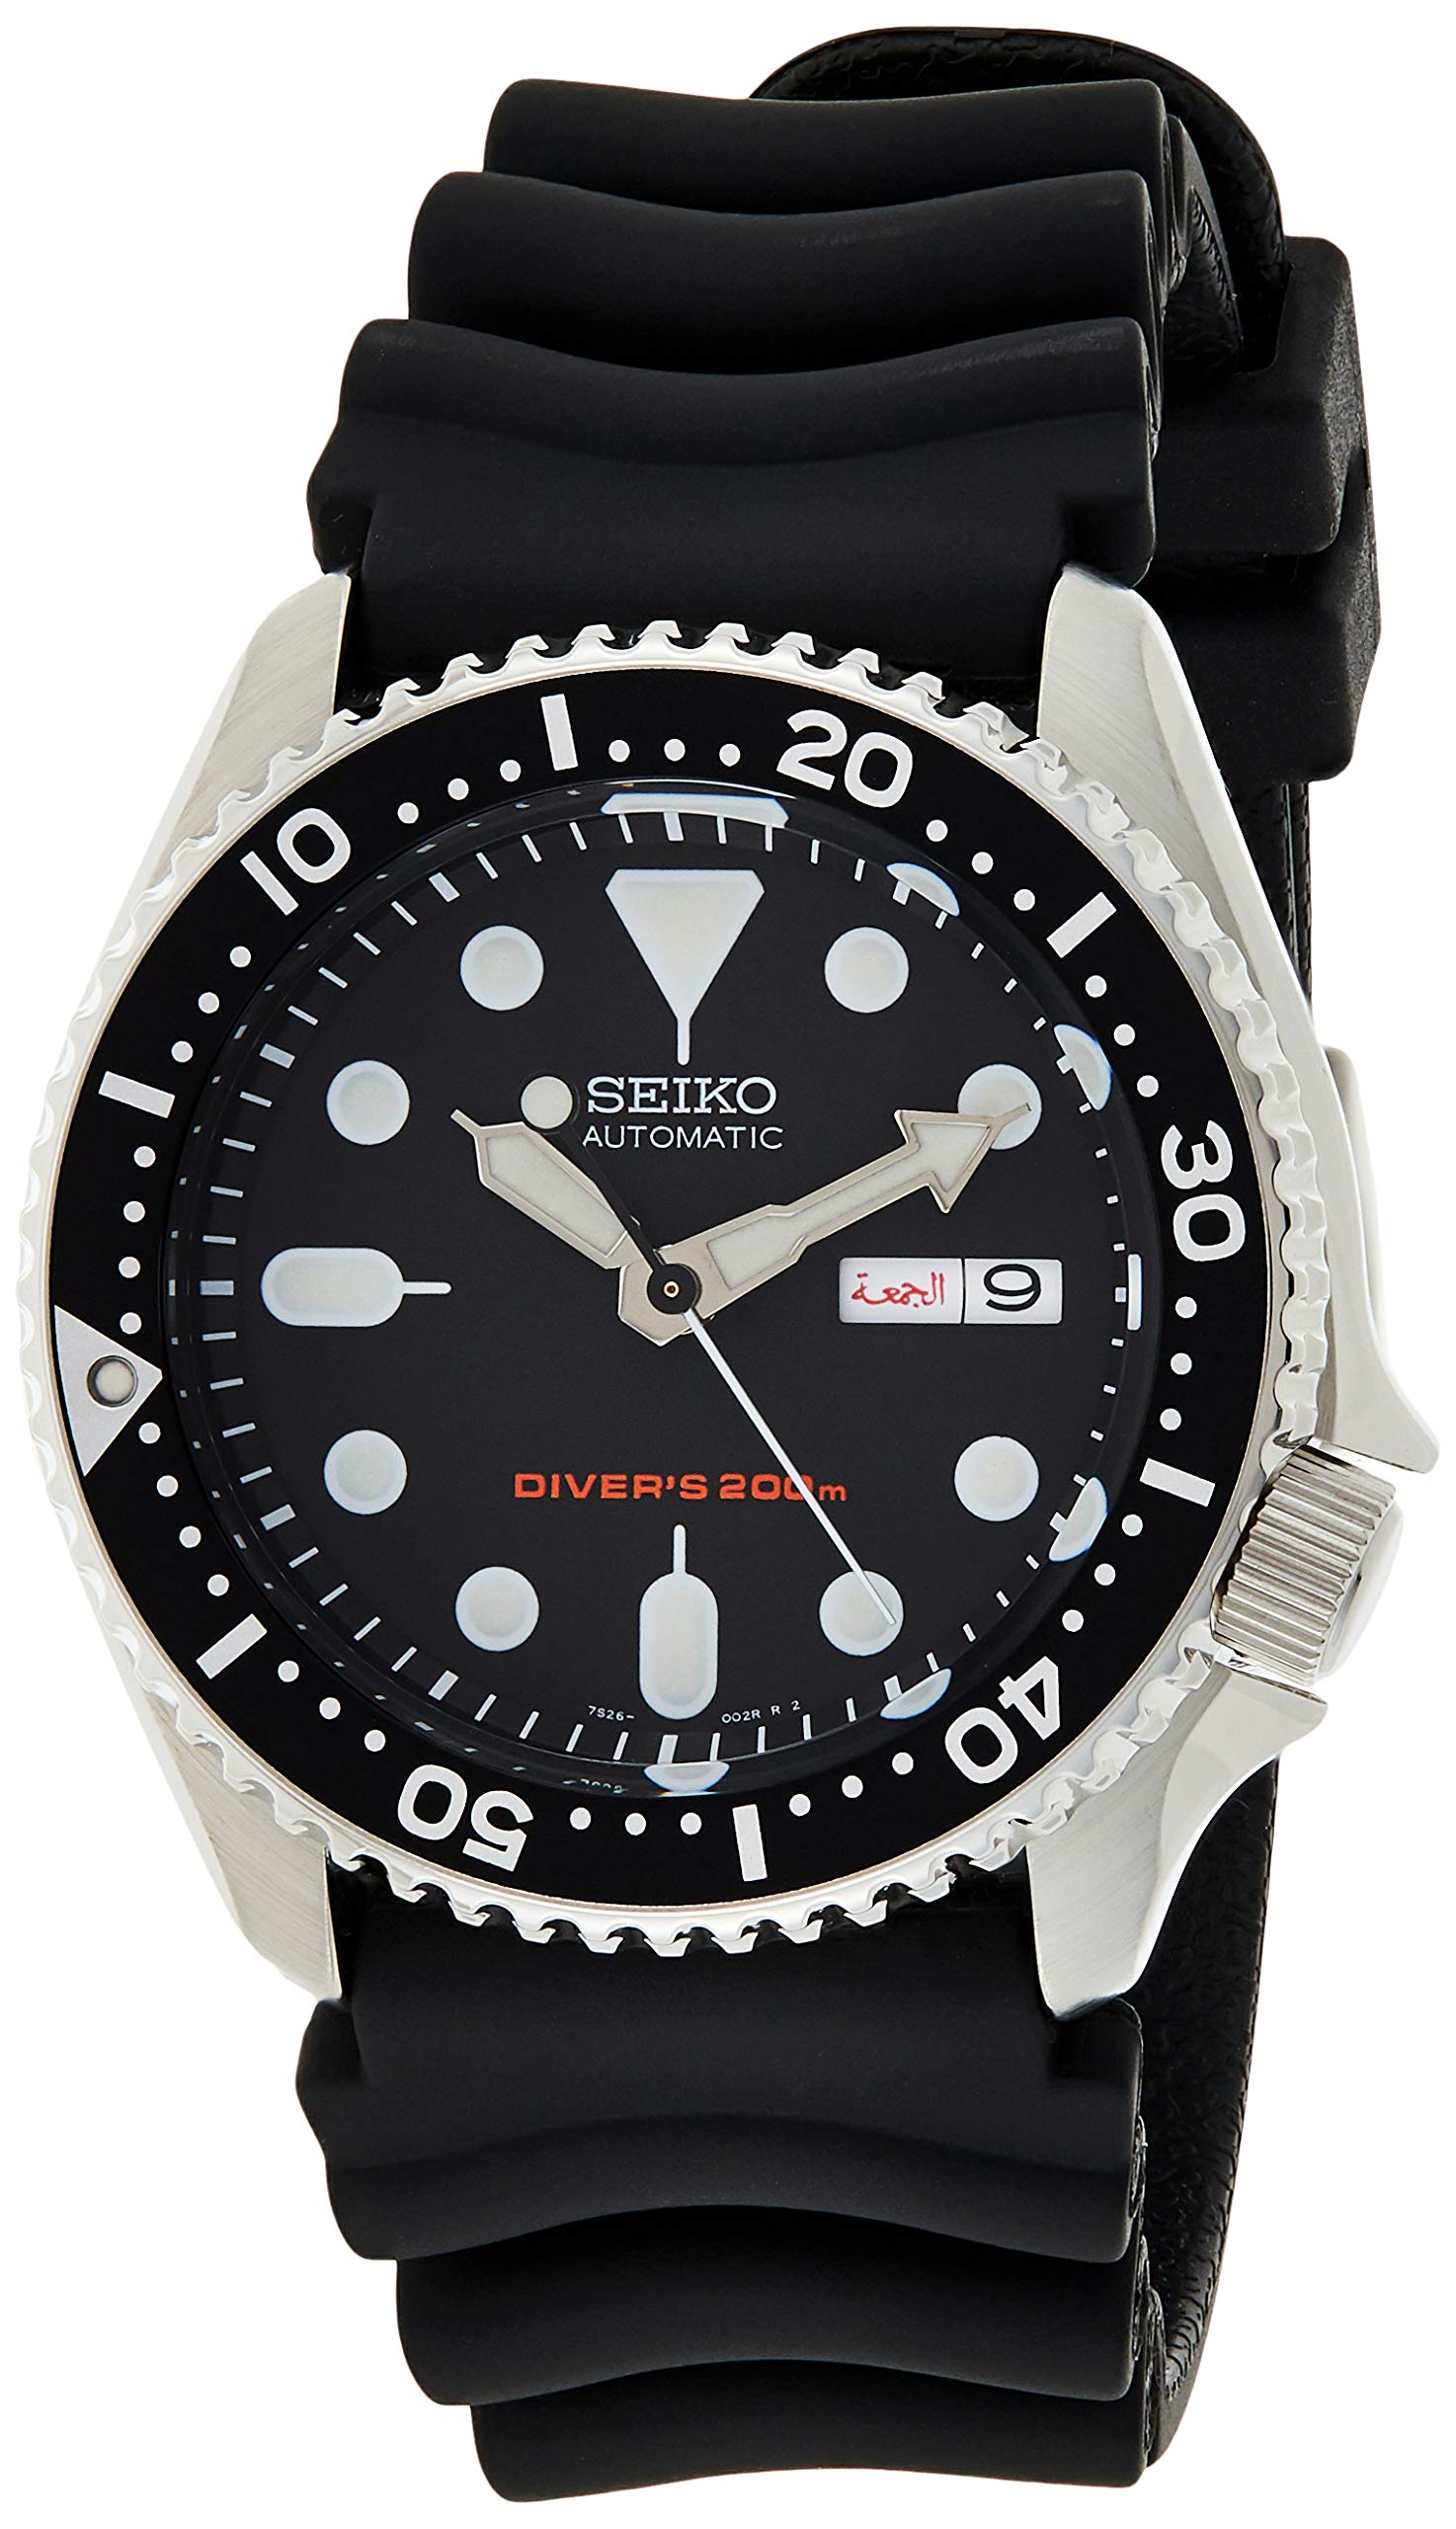 SEIKO Men's Automatic Analogue Watch with Rubber Strap SKX007K